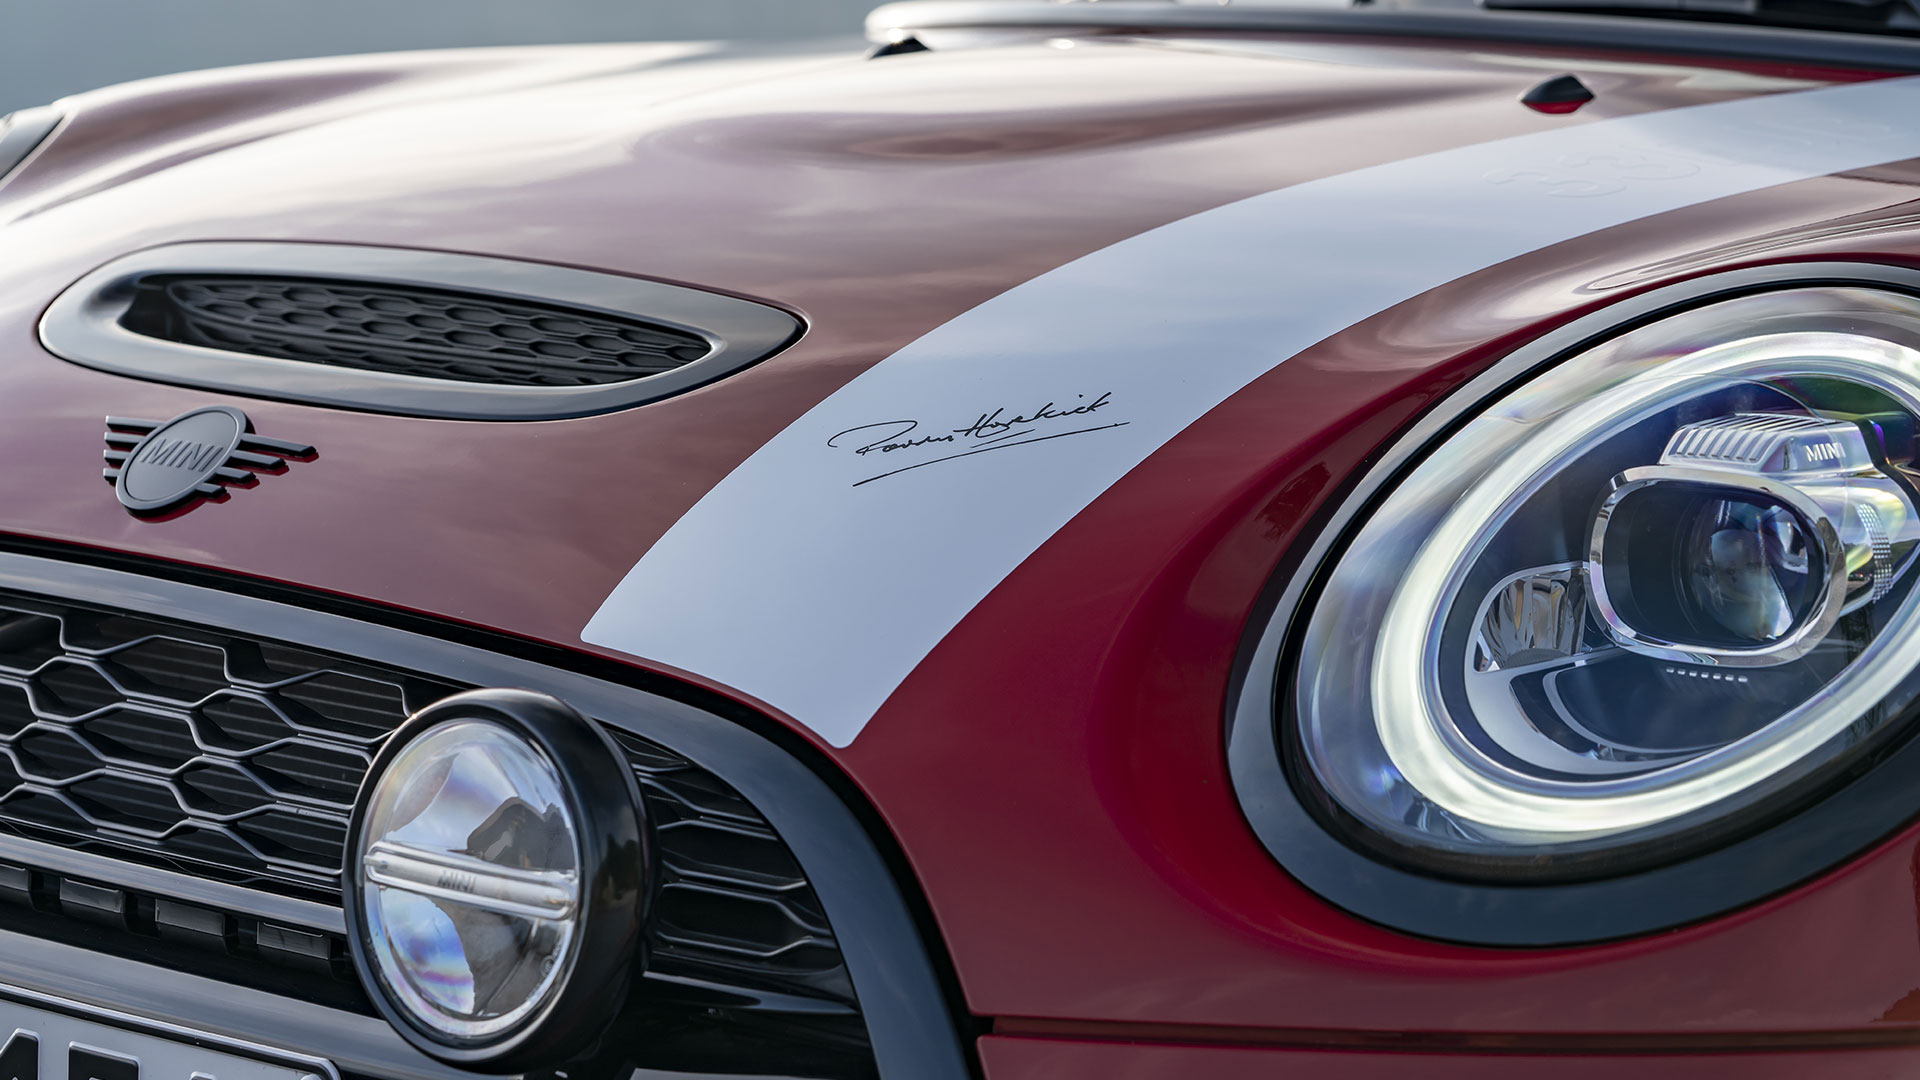 The Mini Paddy Hopkirk Edition close up